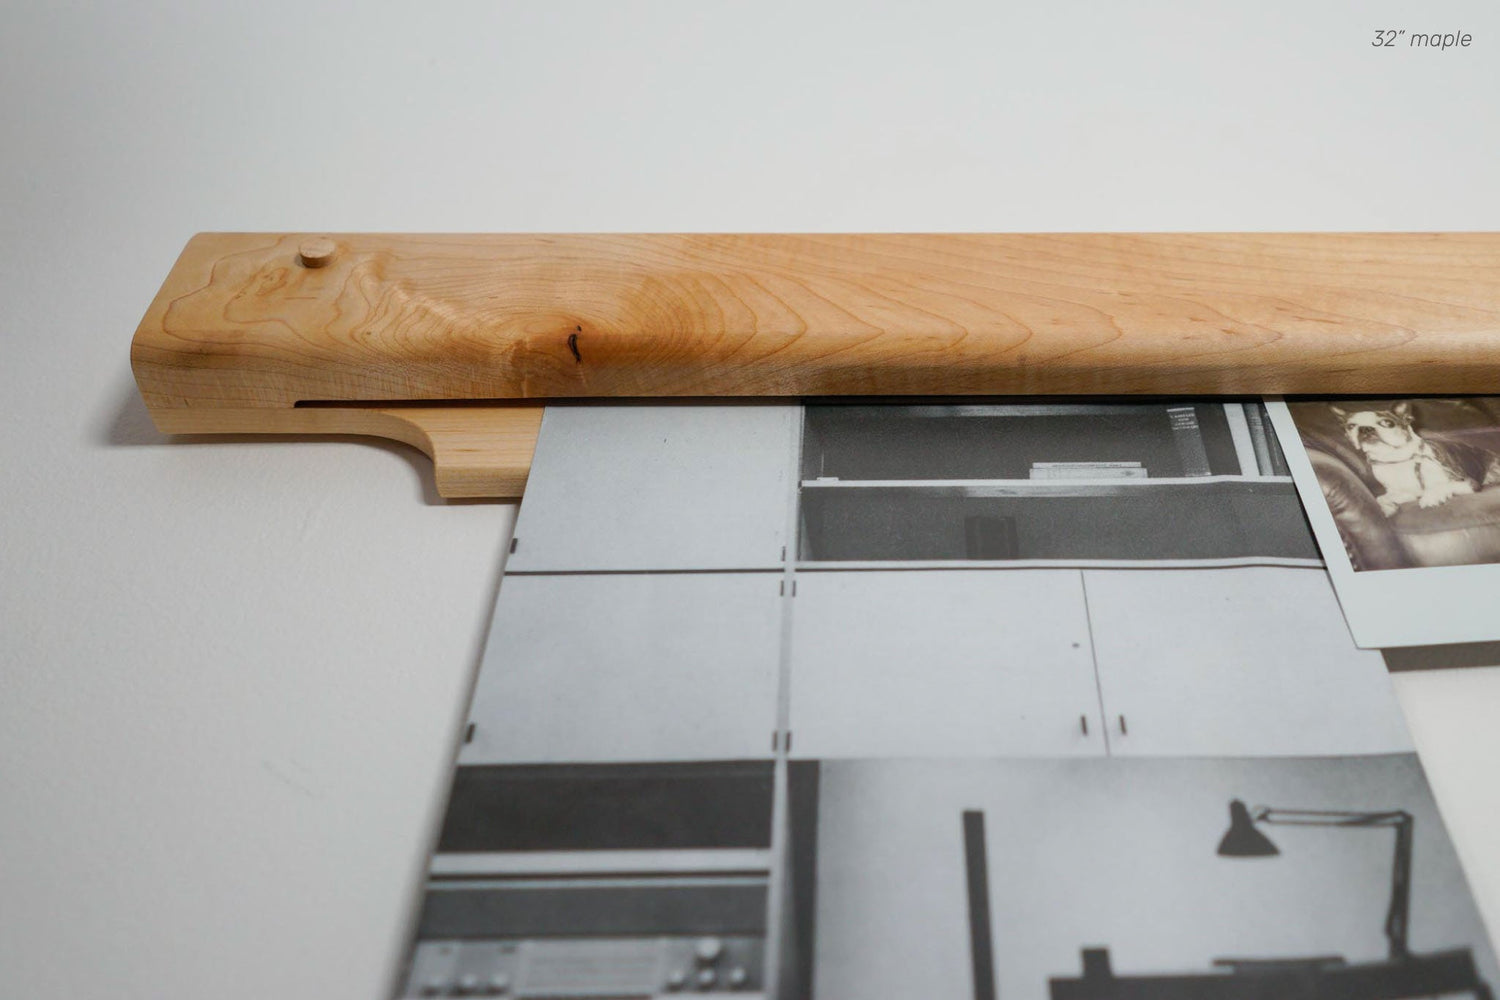 The Gravity Bar, by Biglow Woodcraft; a wooden holder for papers, pictures and images. Wooden bar installed on a white wall, holding a black and white photo of a kitchen. Hardwood Maple